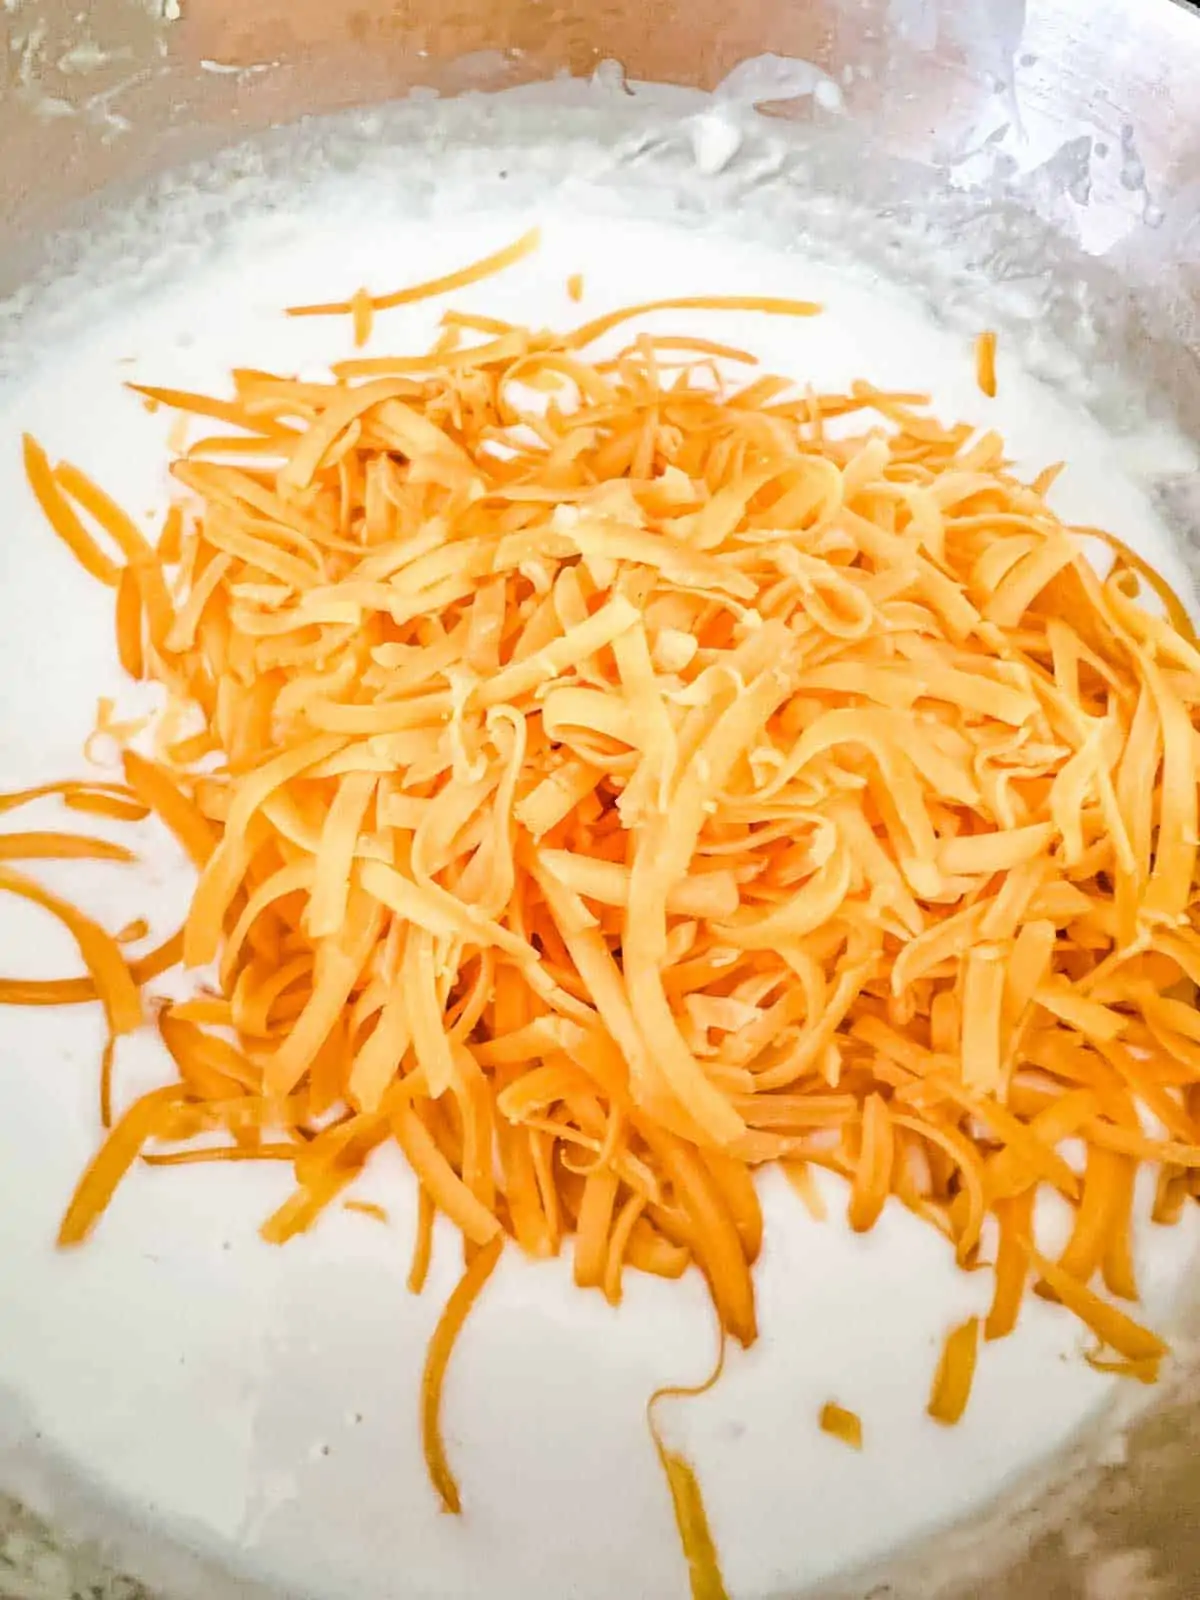 Photo of shredded cheese that has just been added to a cream sauce.